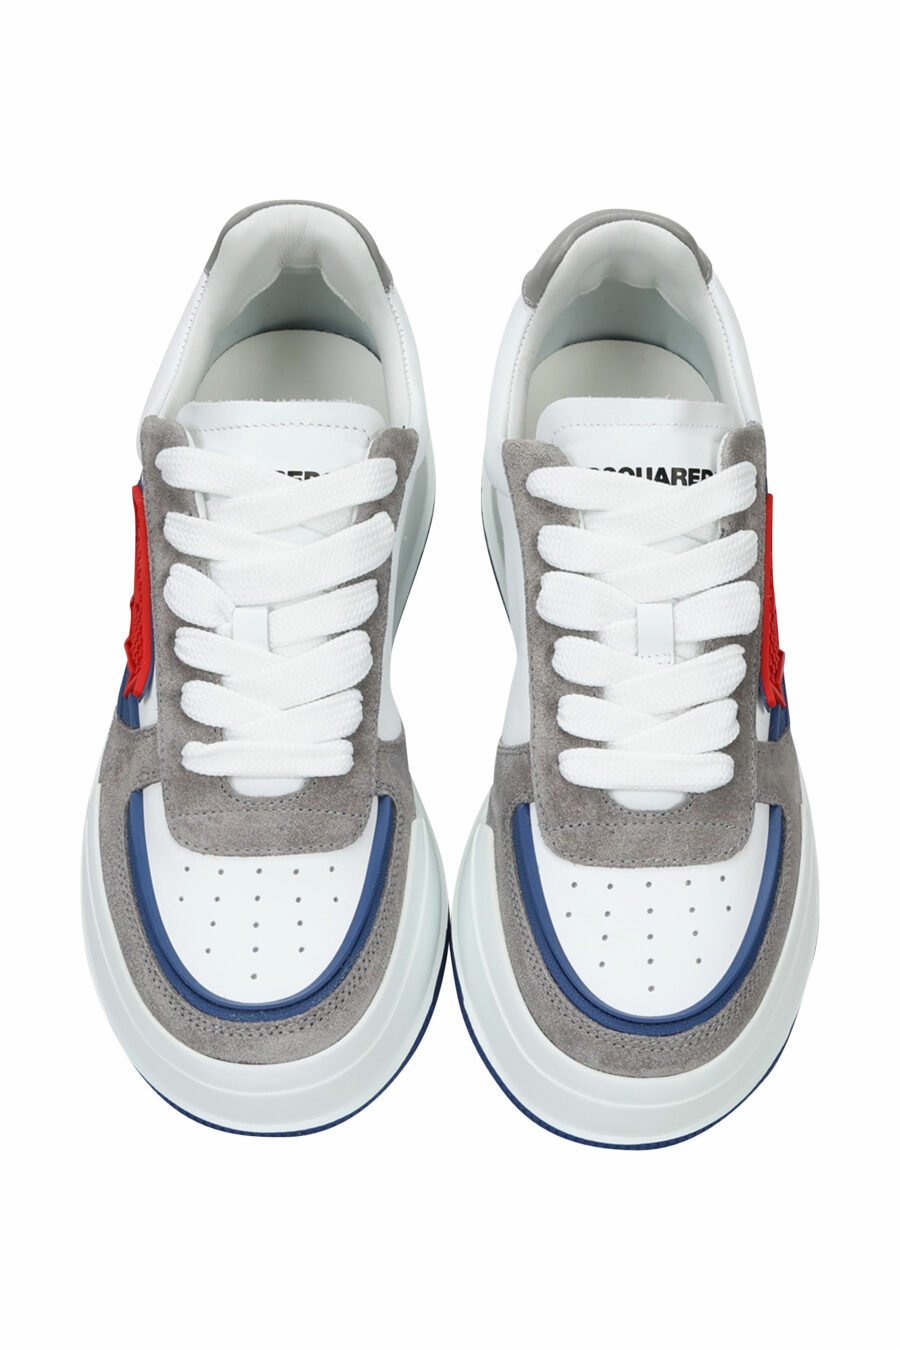 Trainers white mix with grey, blue and red leaf logo - 8055777242216 4